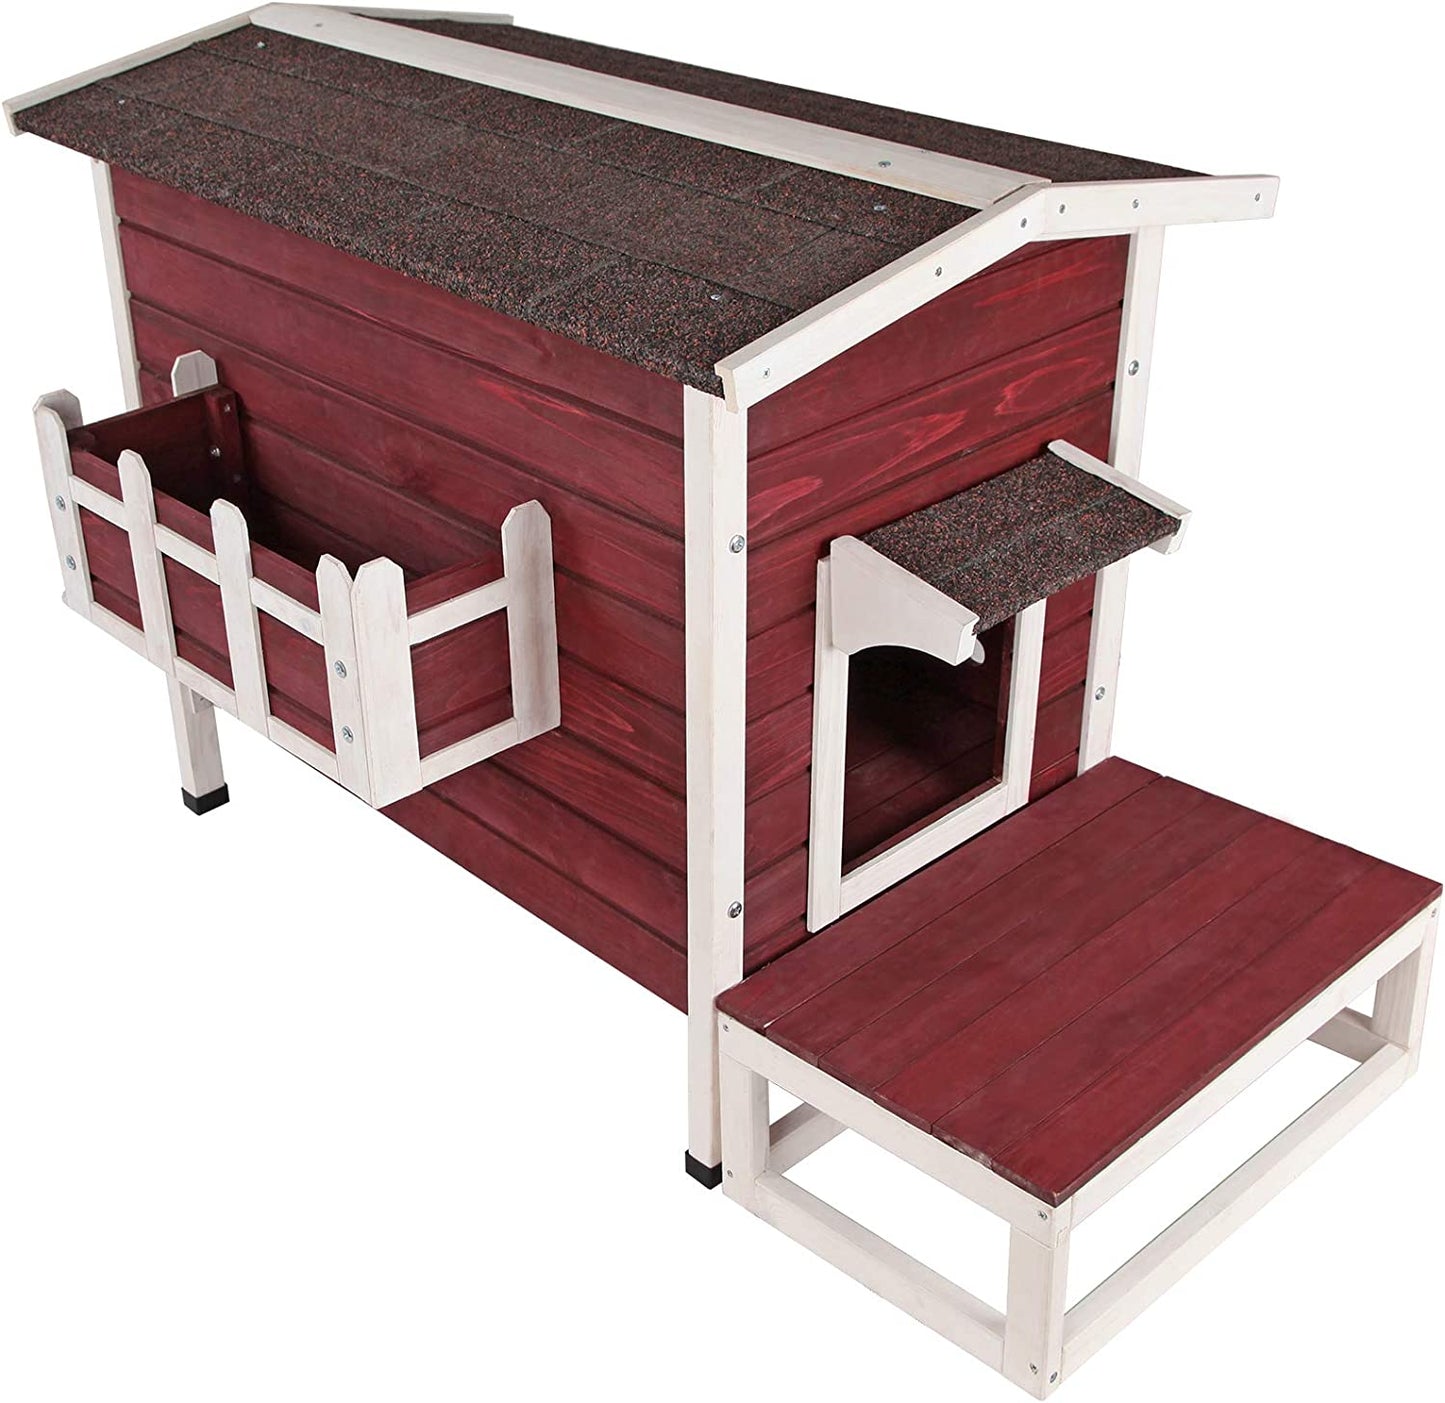 Petsfit-Feral-Cat-House-Larger-Design-for-3-Adult-Outdoor-Cats-Weatherproof-08